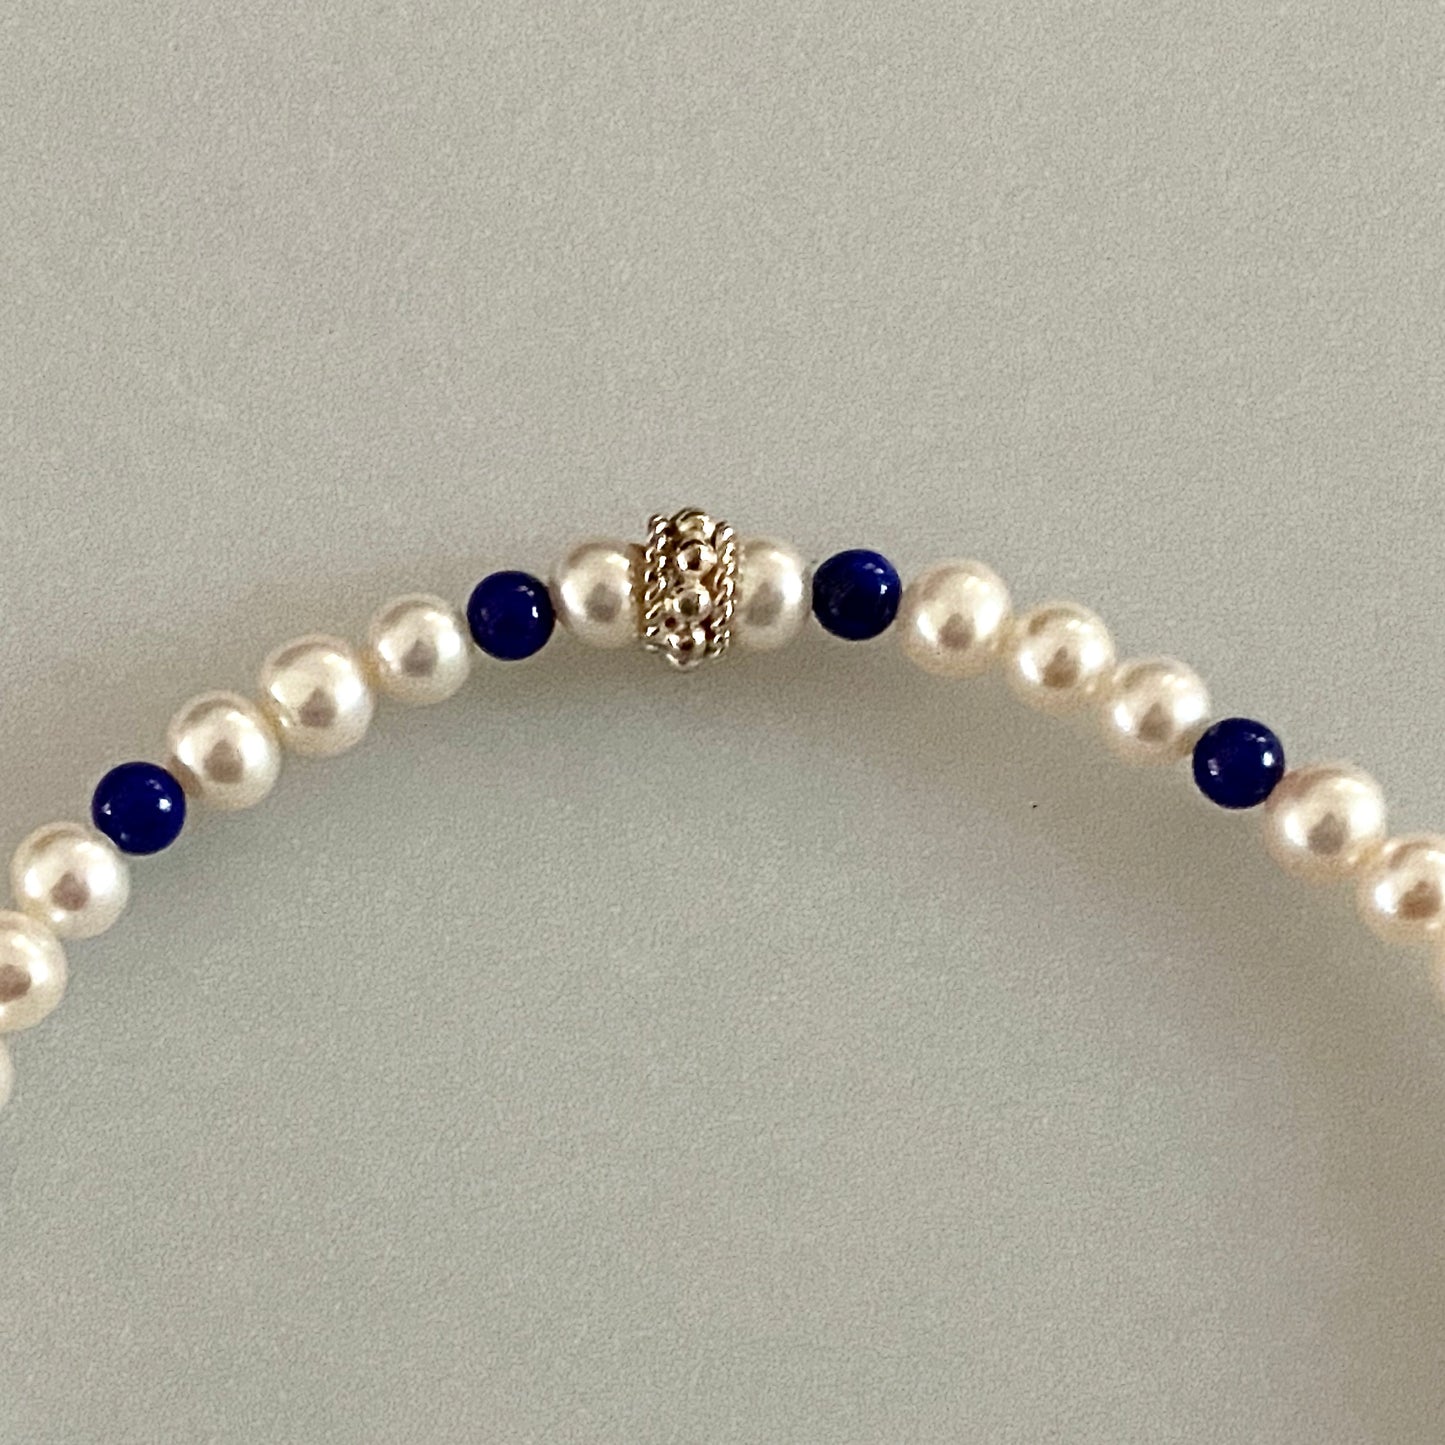 7" Stretch Bracelet with Natural Lapis Lazuli Beads, White Cultured Freshwater Pearls & Handmade Sterling Silver Bali Bead